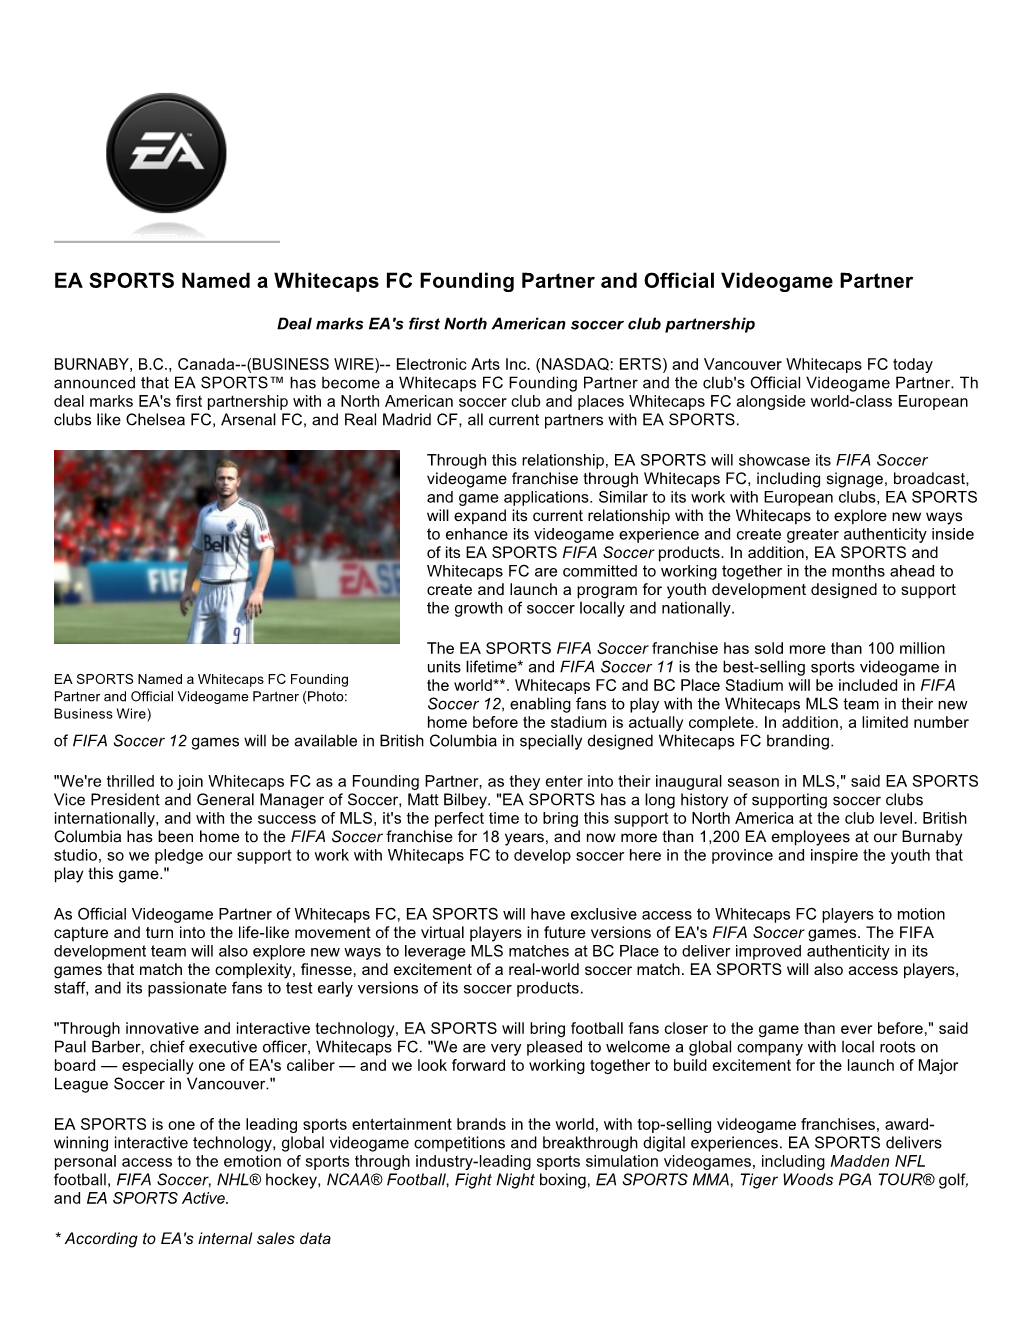 EA SPORTS Named a Whitecaps FC Founding Partner and Official Videogame Partner